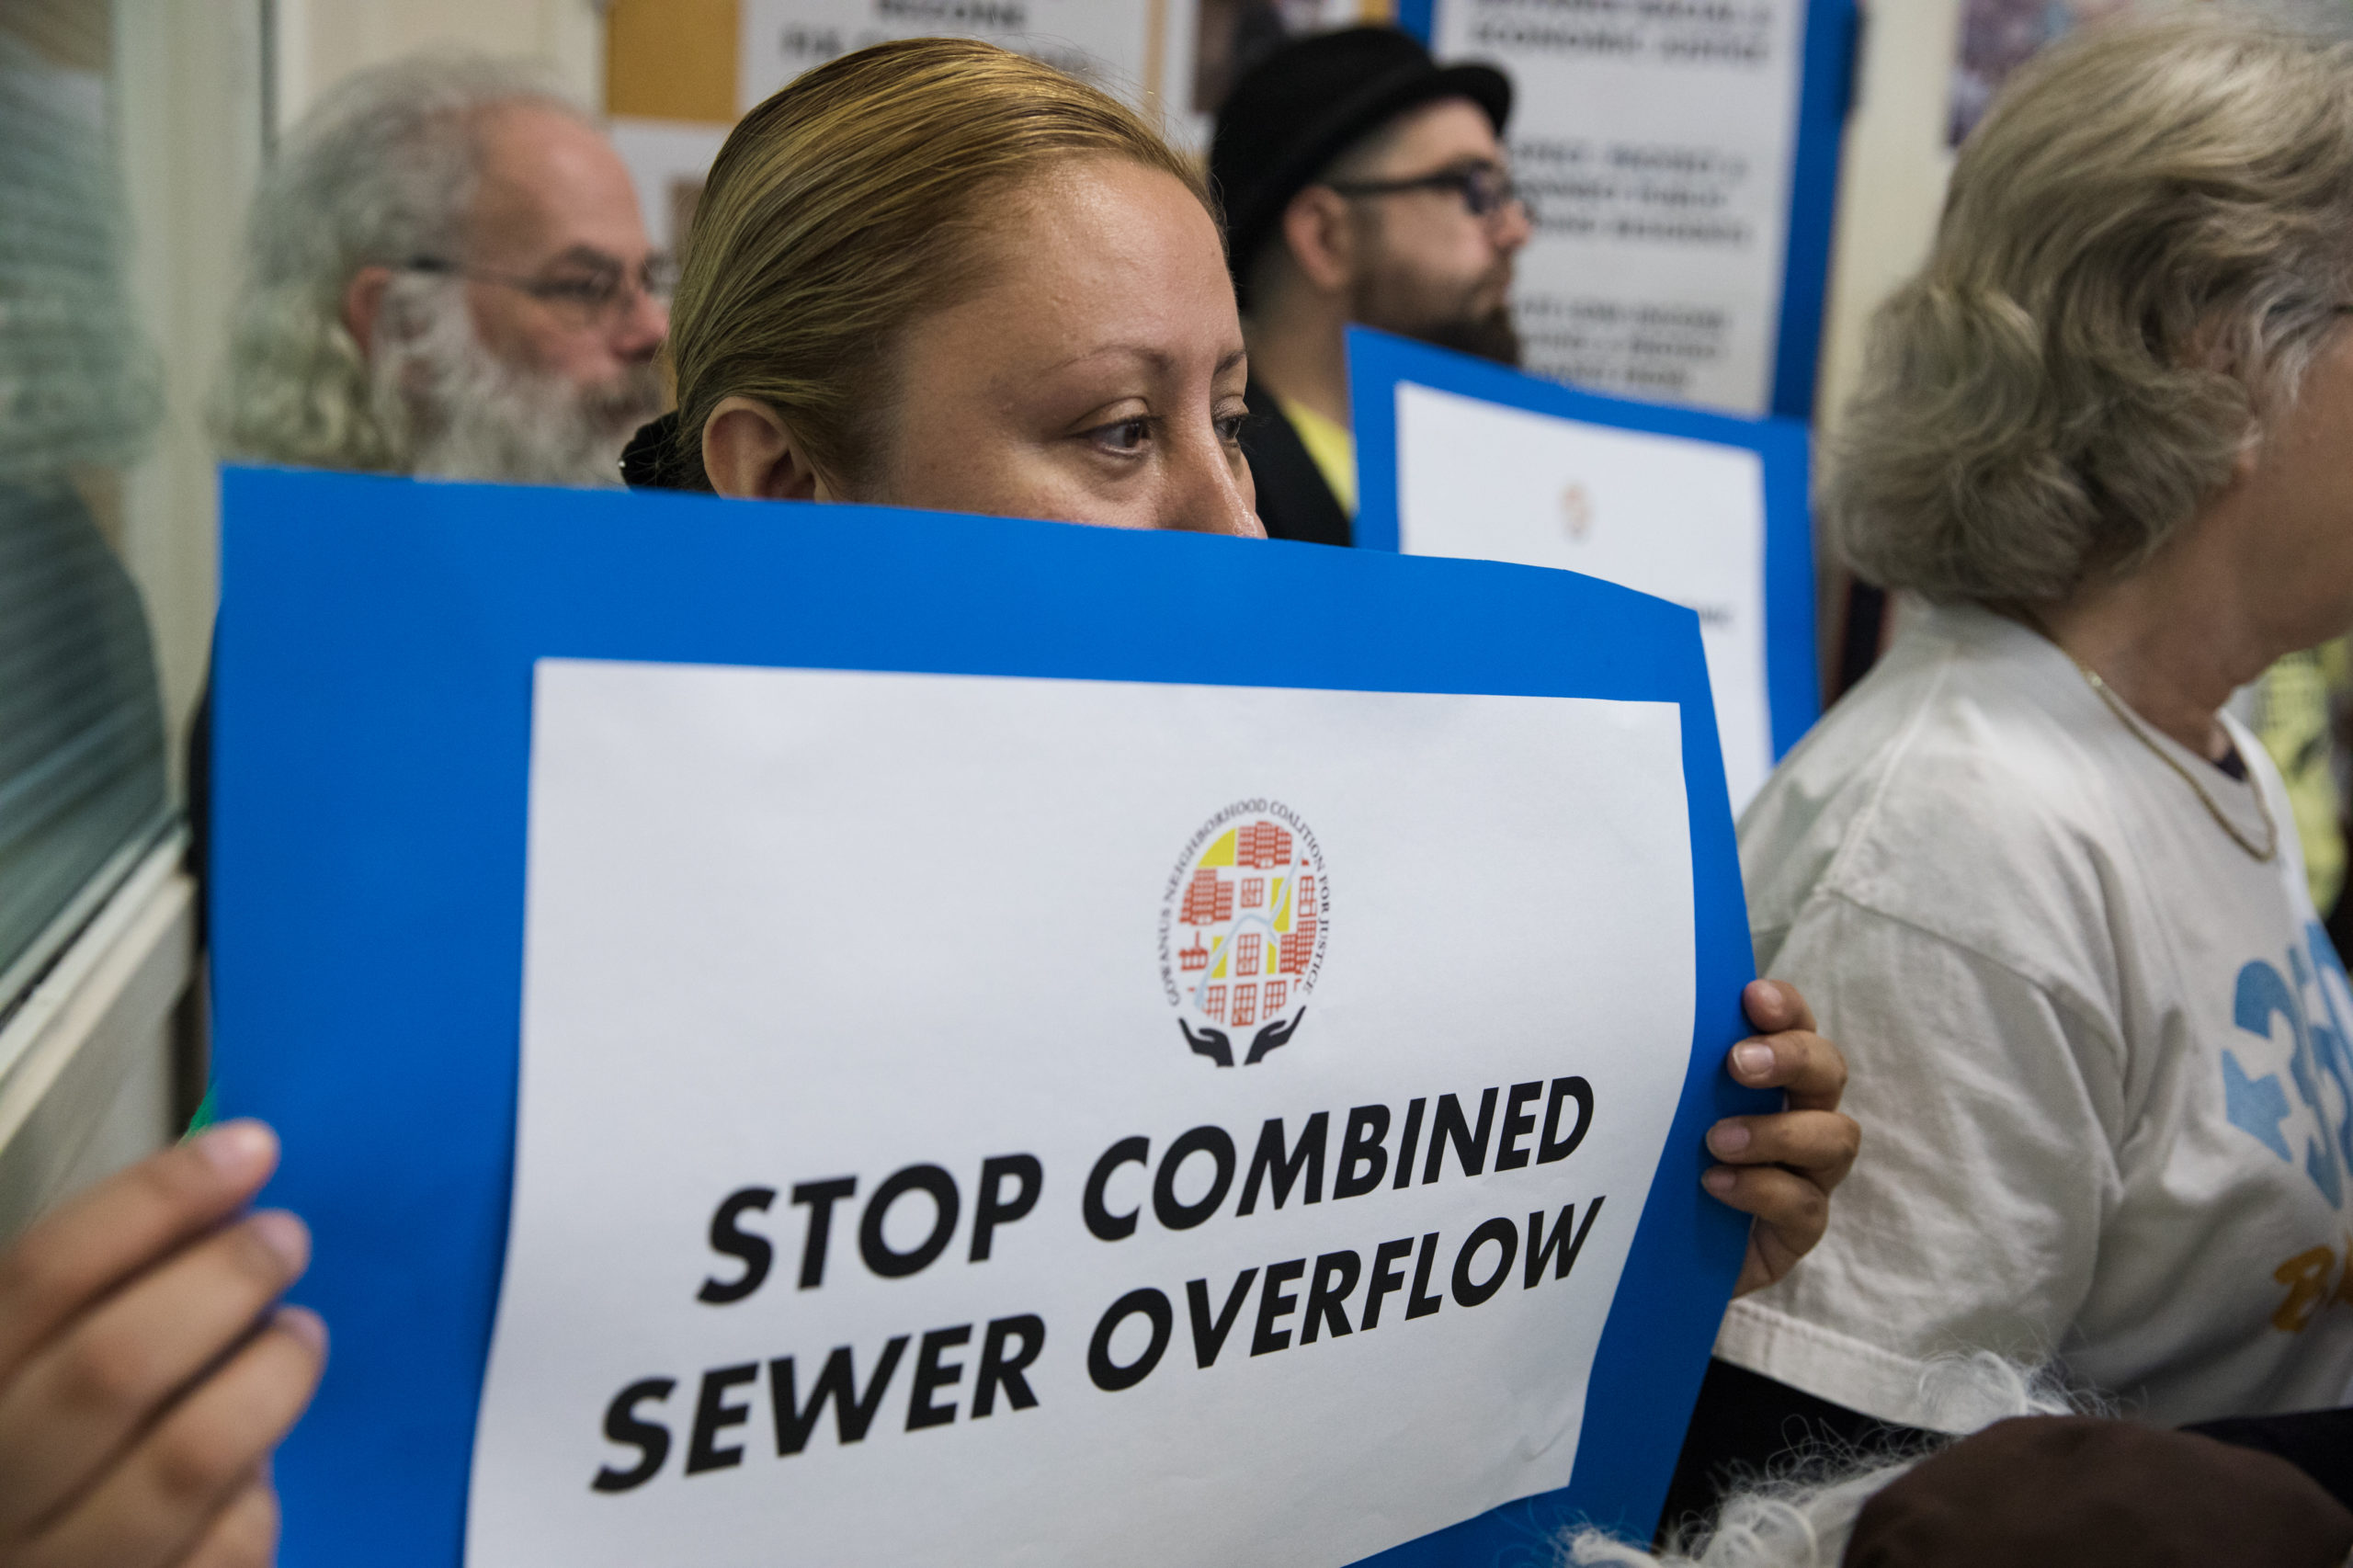 Of the GNCJ's top demands for the potential Gowanus rezoning was a net zero combined sewer overflow. The neighborhood has long struggled from contamination from the city's aging sewage system. Photo: Paul Frangipane/Brooklyn Eagle